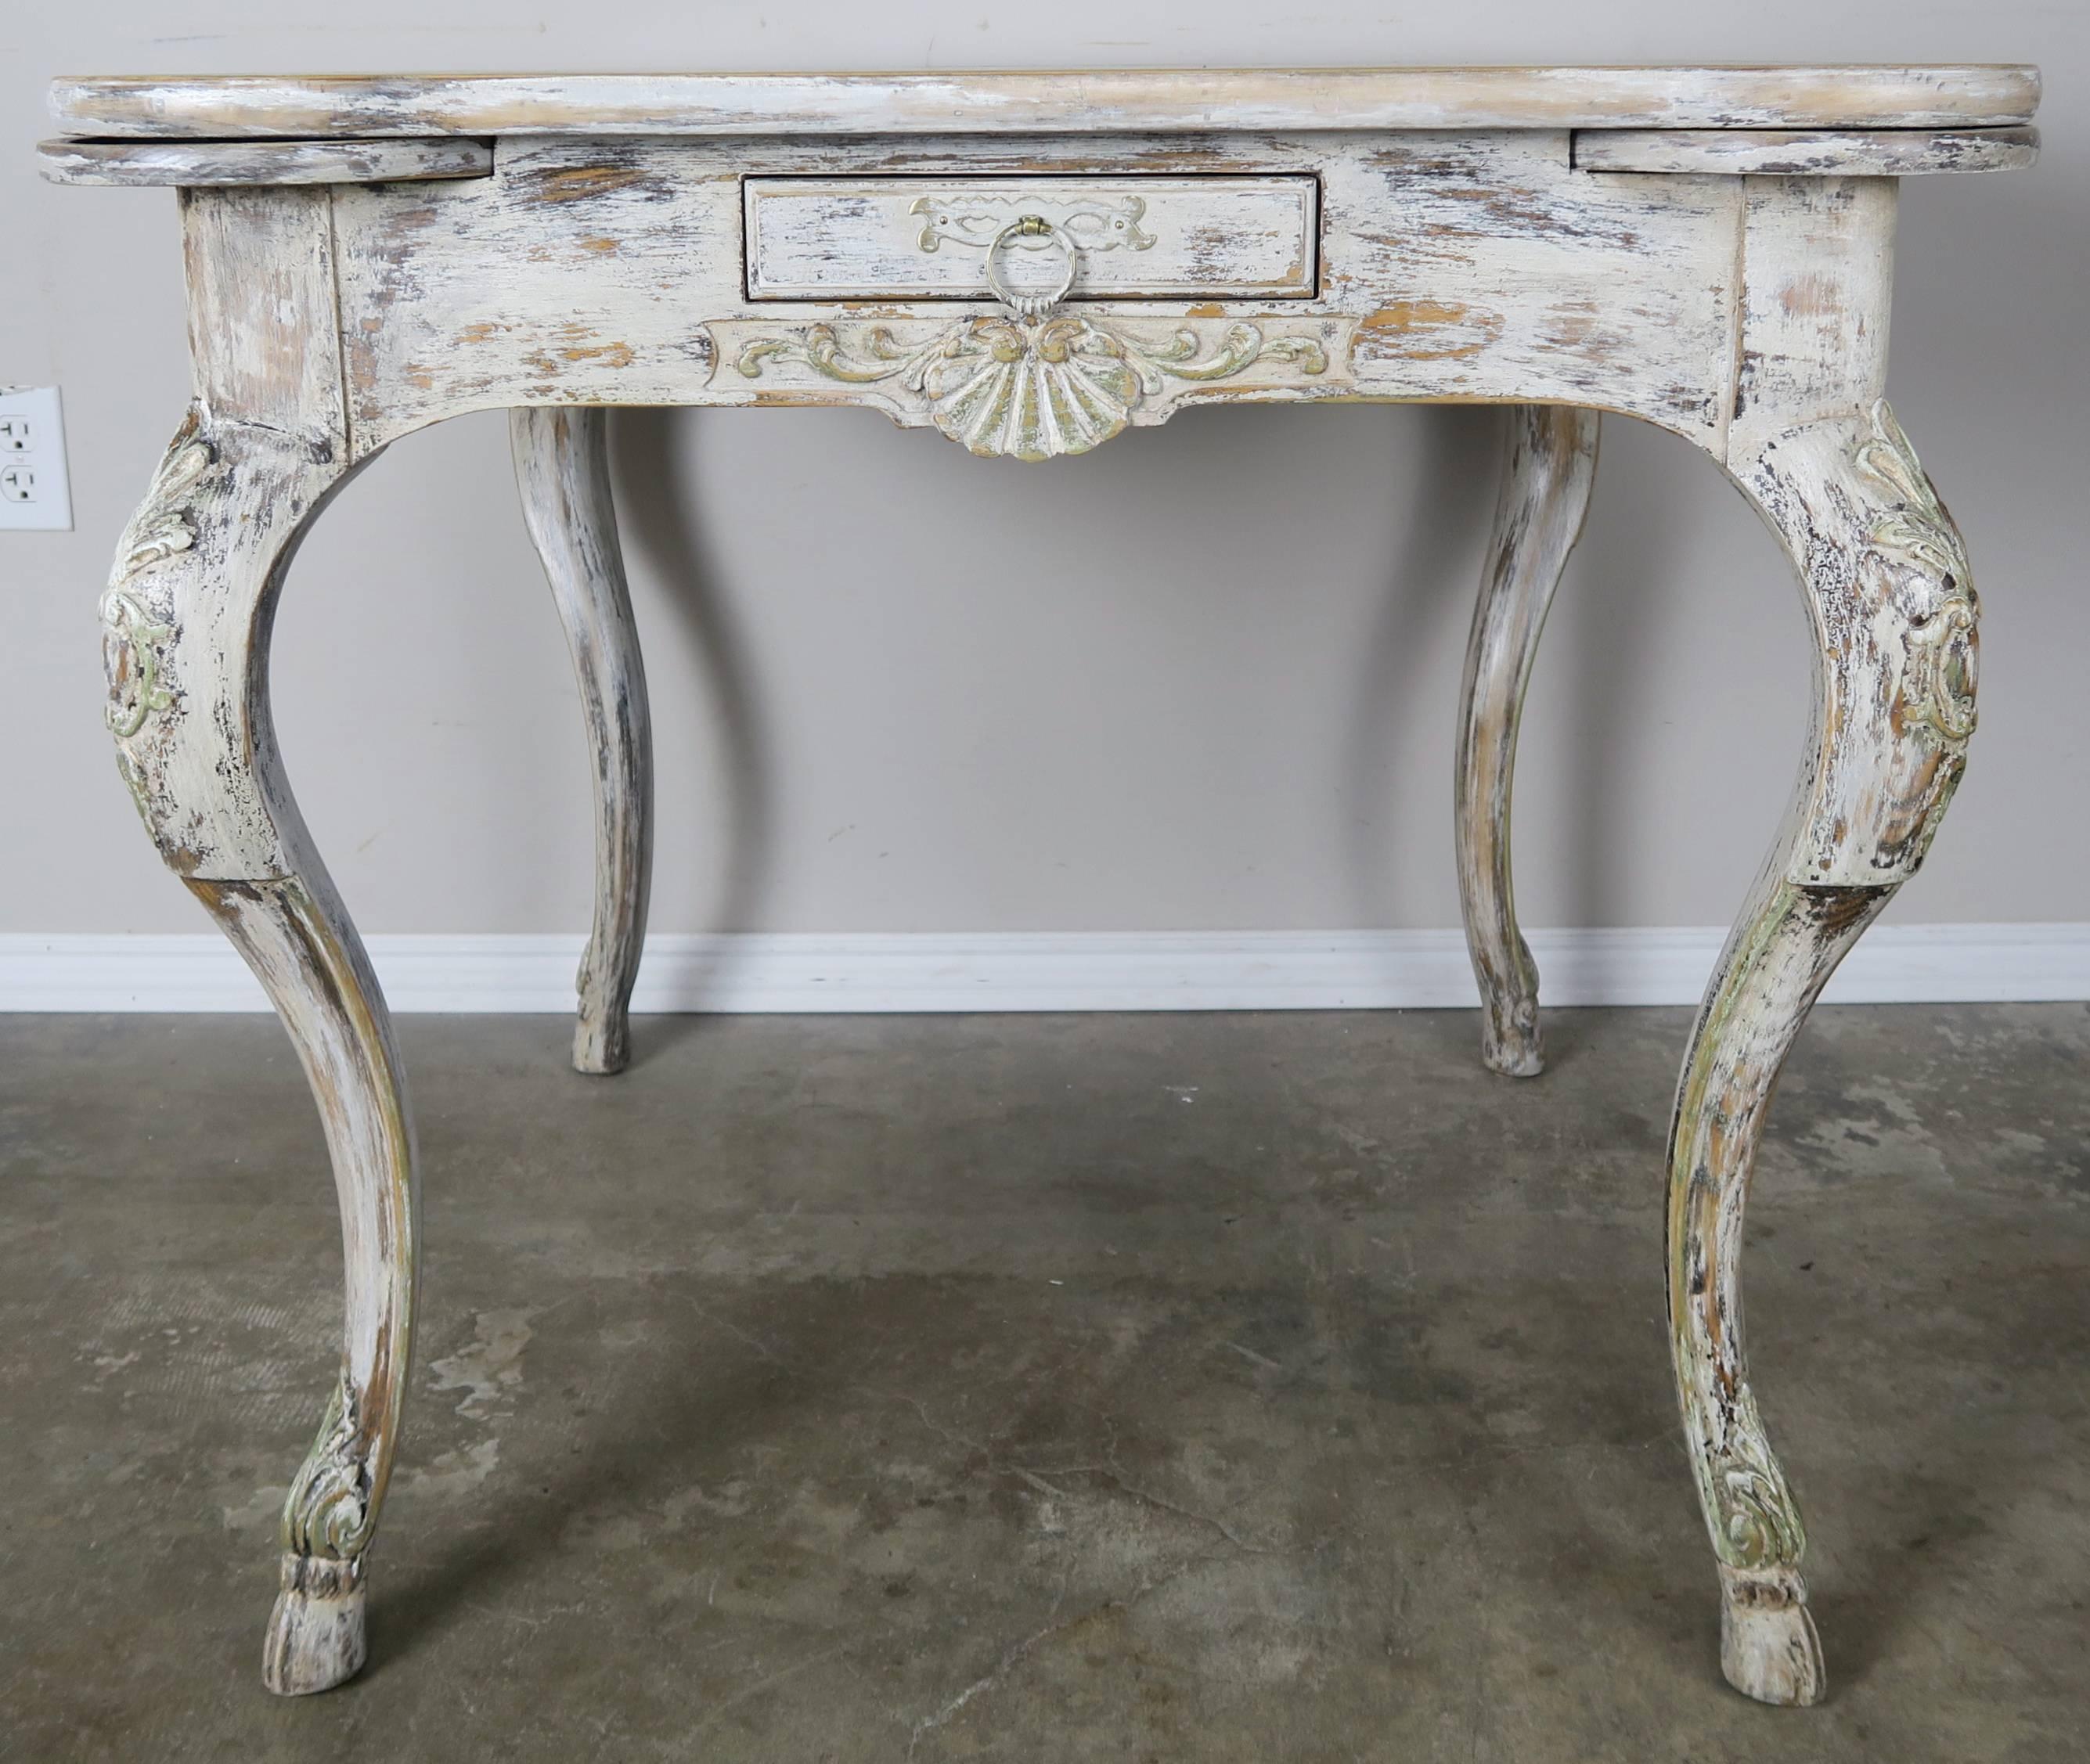 French painted game table with weathered finish. Each corner has a  circular pull out shelf for drinks.  Single drawer with pull out ring and surrounding hardware. The table stands on four carved cabriole legs that end in animal hoof feet.  Carved